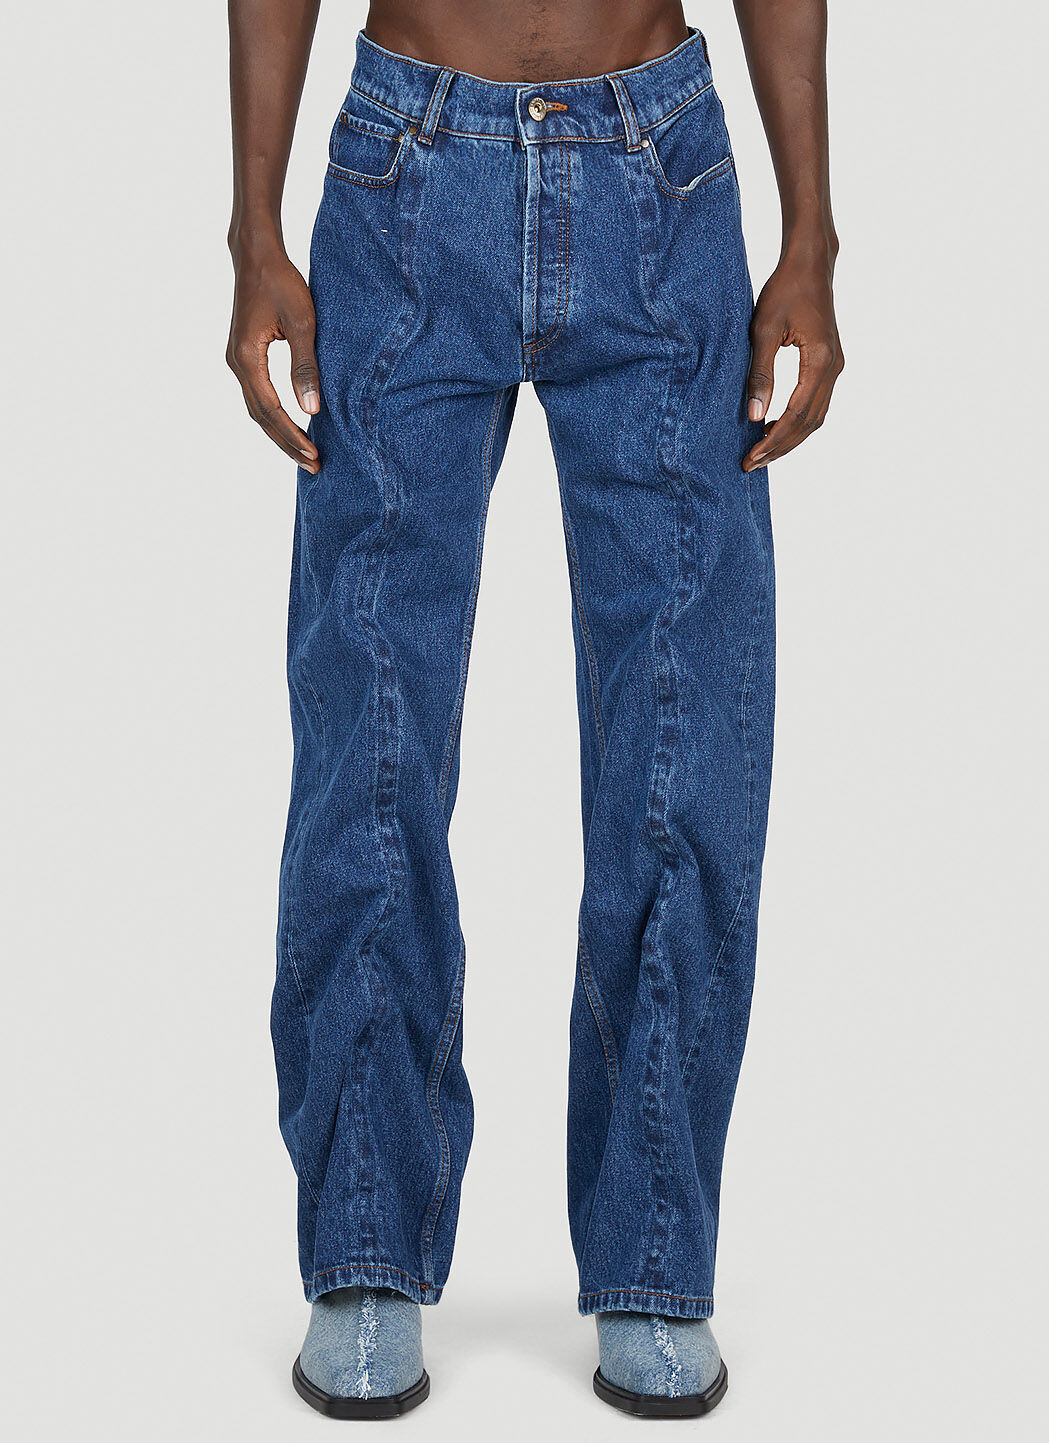 Y/project Wire Jeans In Blue | ModeSens